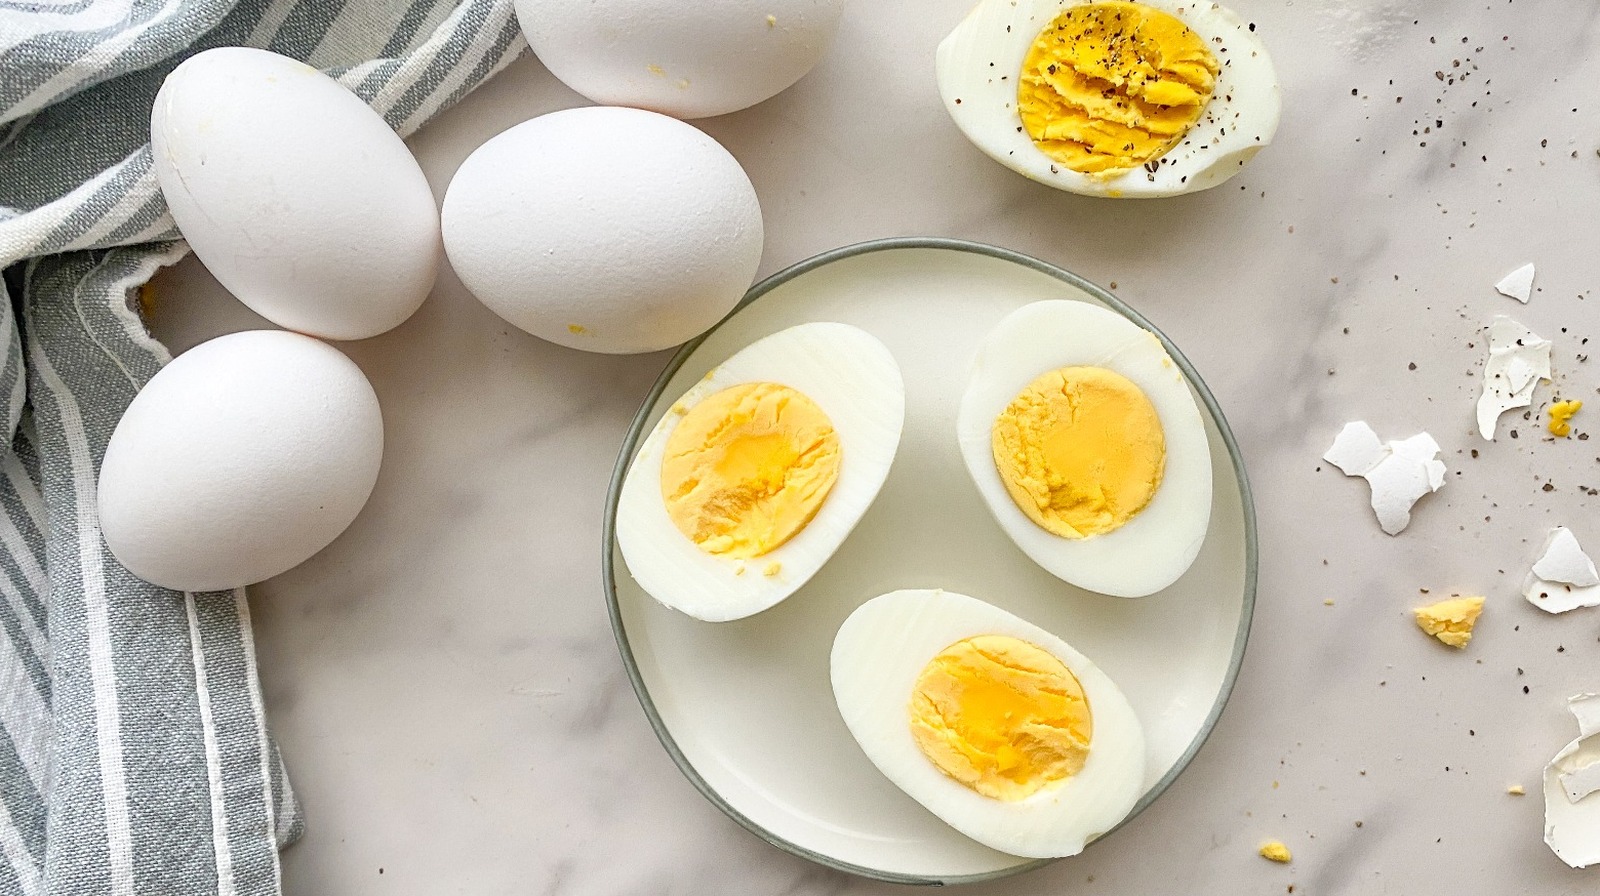 https://www.tastingtable.com/img/gallery/we-tried-almost-every-way-to-cook-a-hard-boiled-egg/l-intro-1675704453.jpg